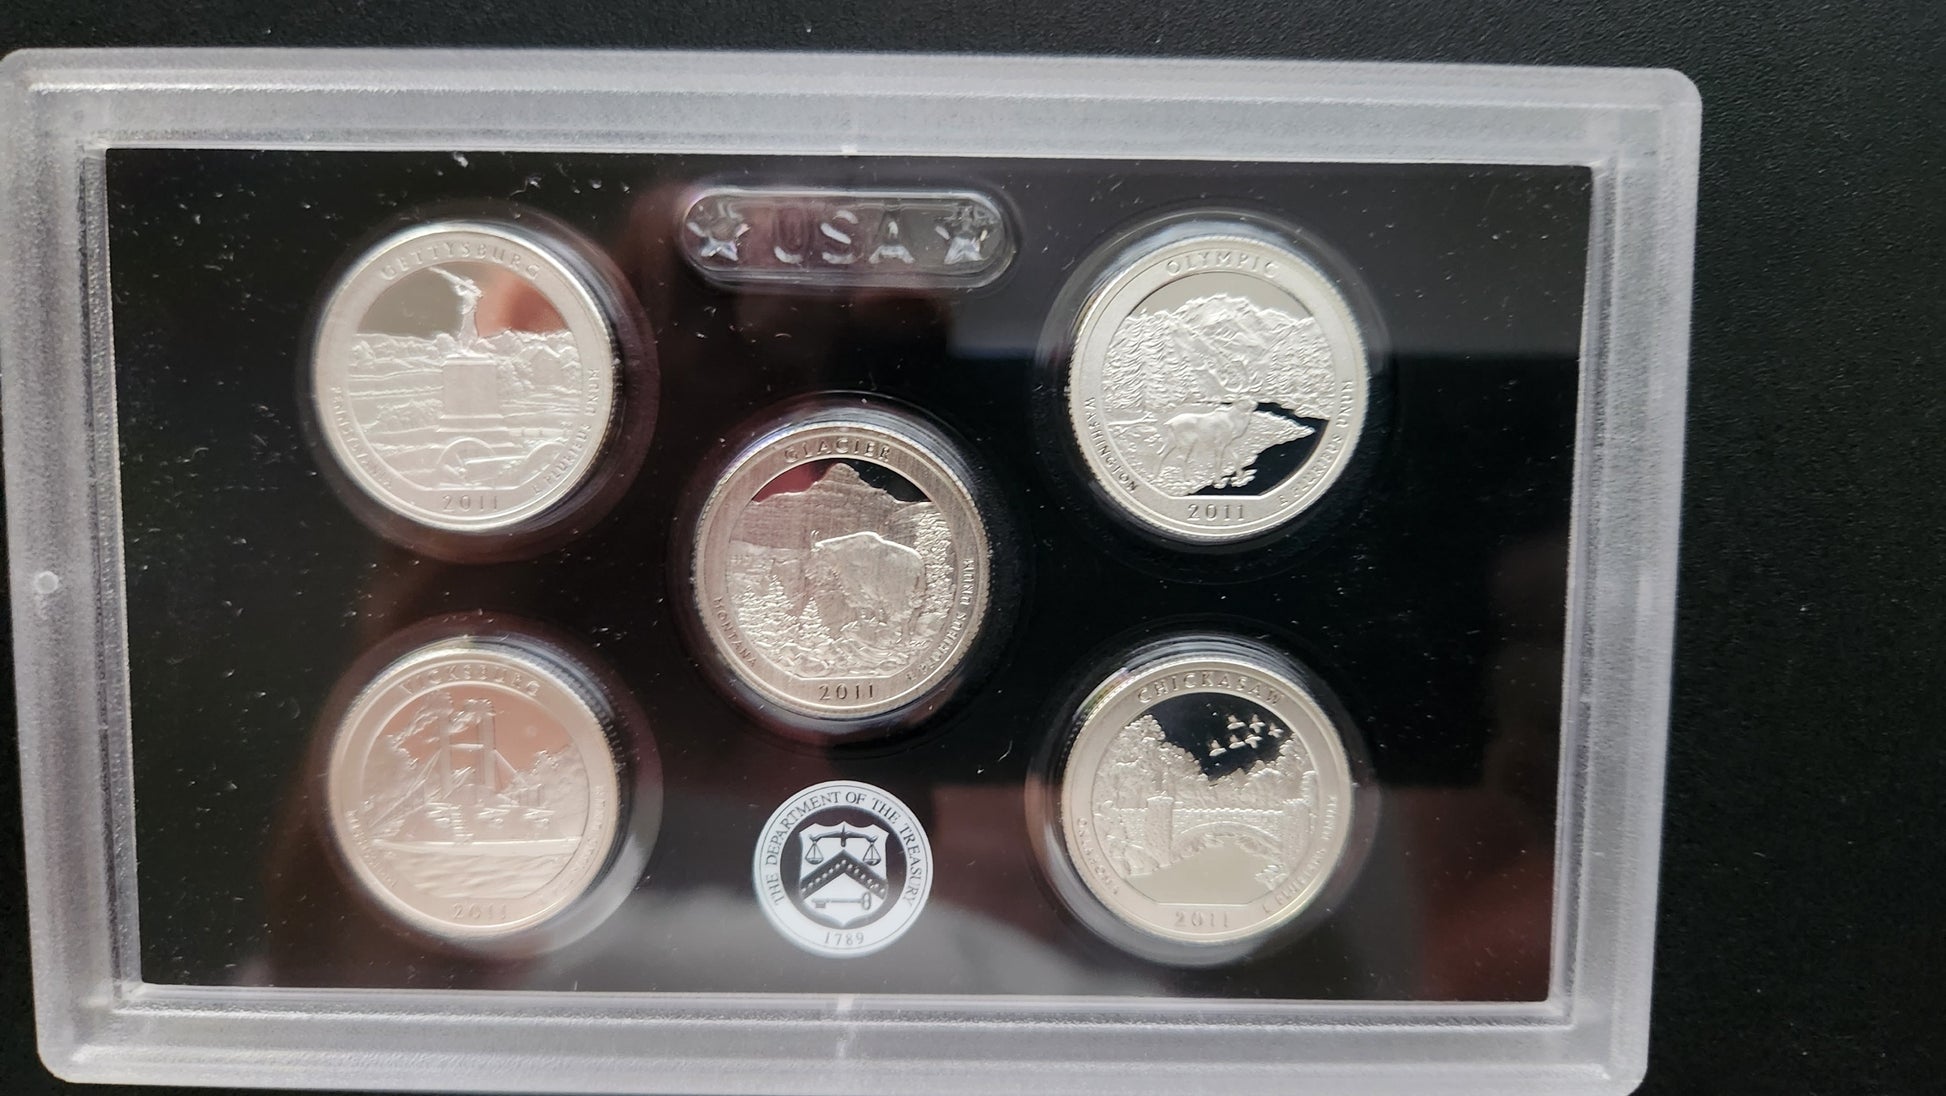 2011 United States Mint Silver Proof Set